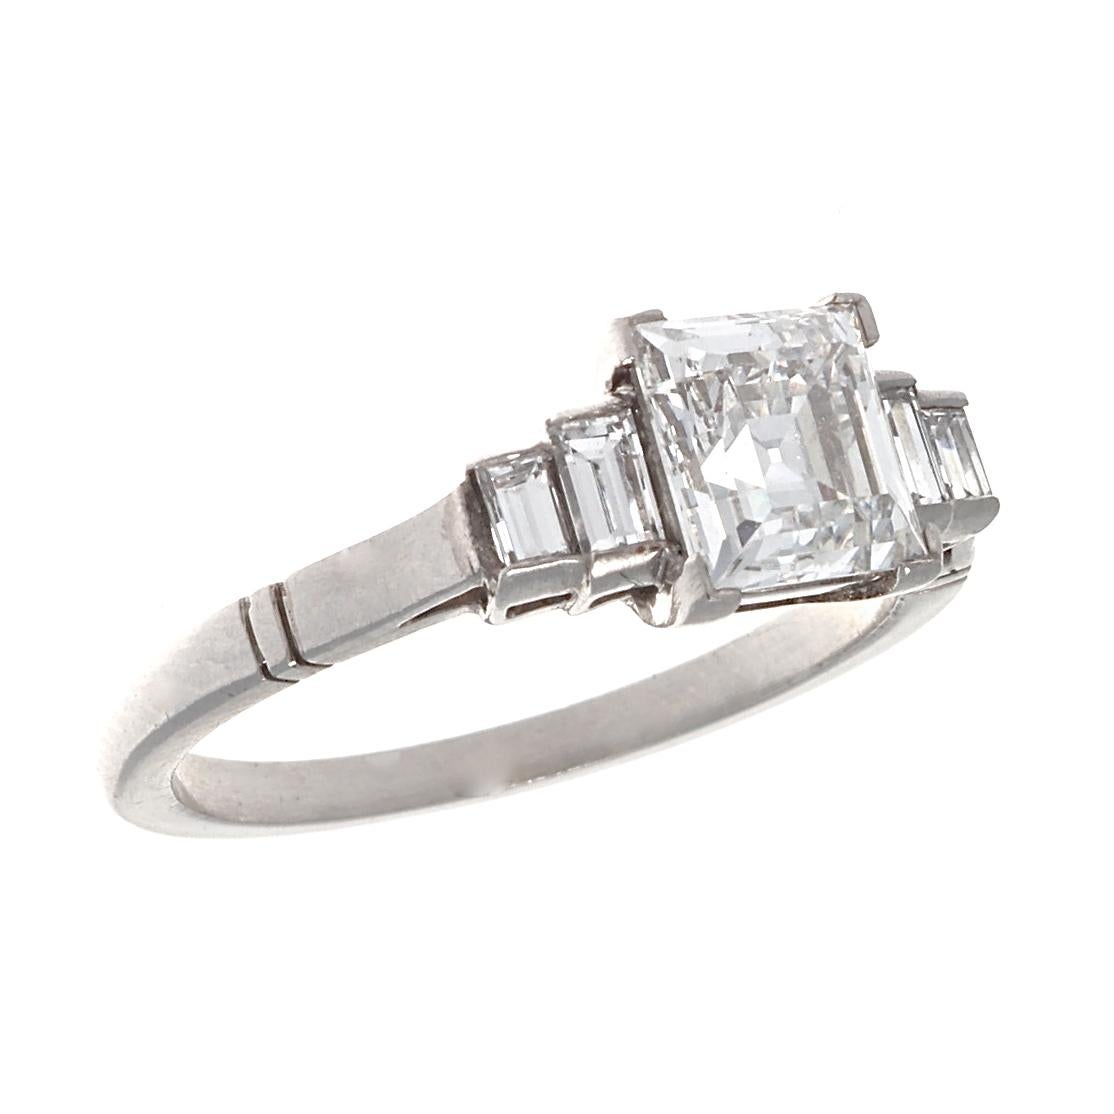 When you want a beautiful emerald cut diamond that reminds you of lightness and joy, you choose the setting that is in accord with such ideals. Featuring a GIA 1.17 carat Carre cut diamond, E color, VVS2 clarity, classic Art Deco lines, and